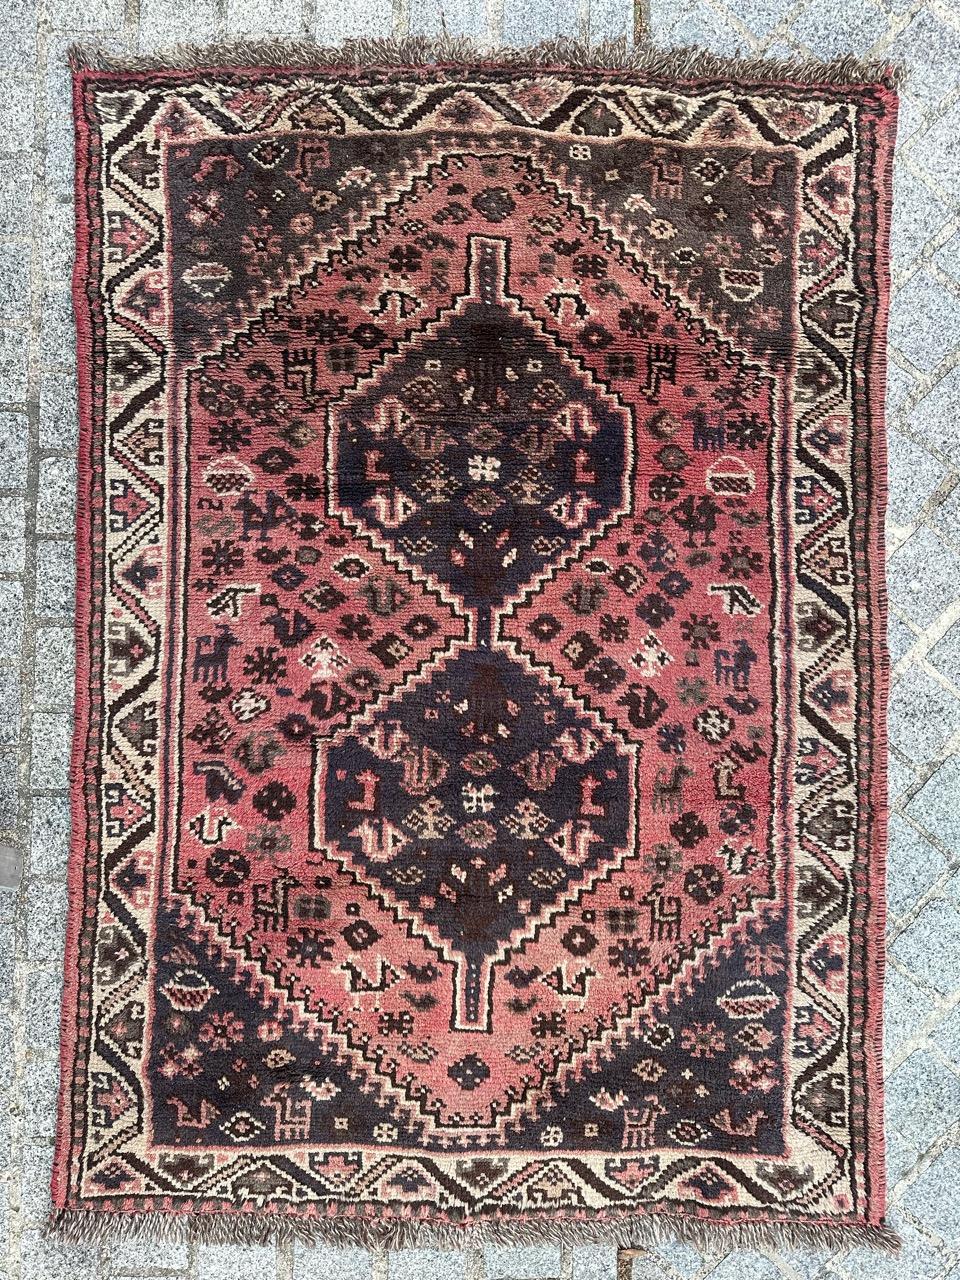 Beautiful vintage Shiraz rug from the second half of the 20th century. Hand-knotted with intricate geometric and stylized designs in vibrant colors. The pink field is adorned with small gray, green, white, and brown stylized motifs. Two dark